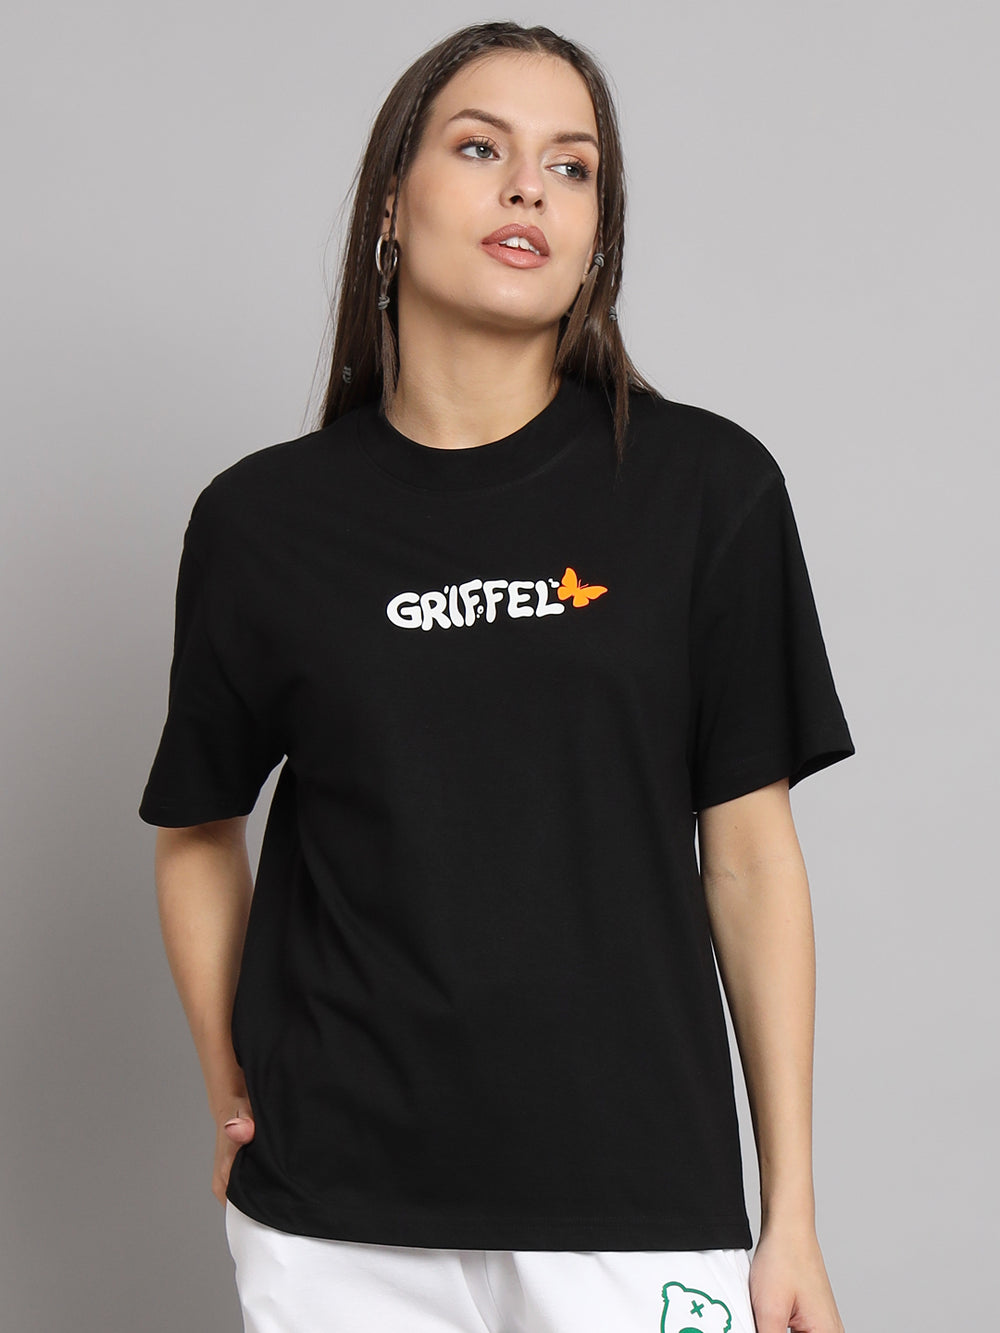 GRIFFEL Women Printed No Bad Days Loose fit Black T-shirt - griffel